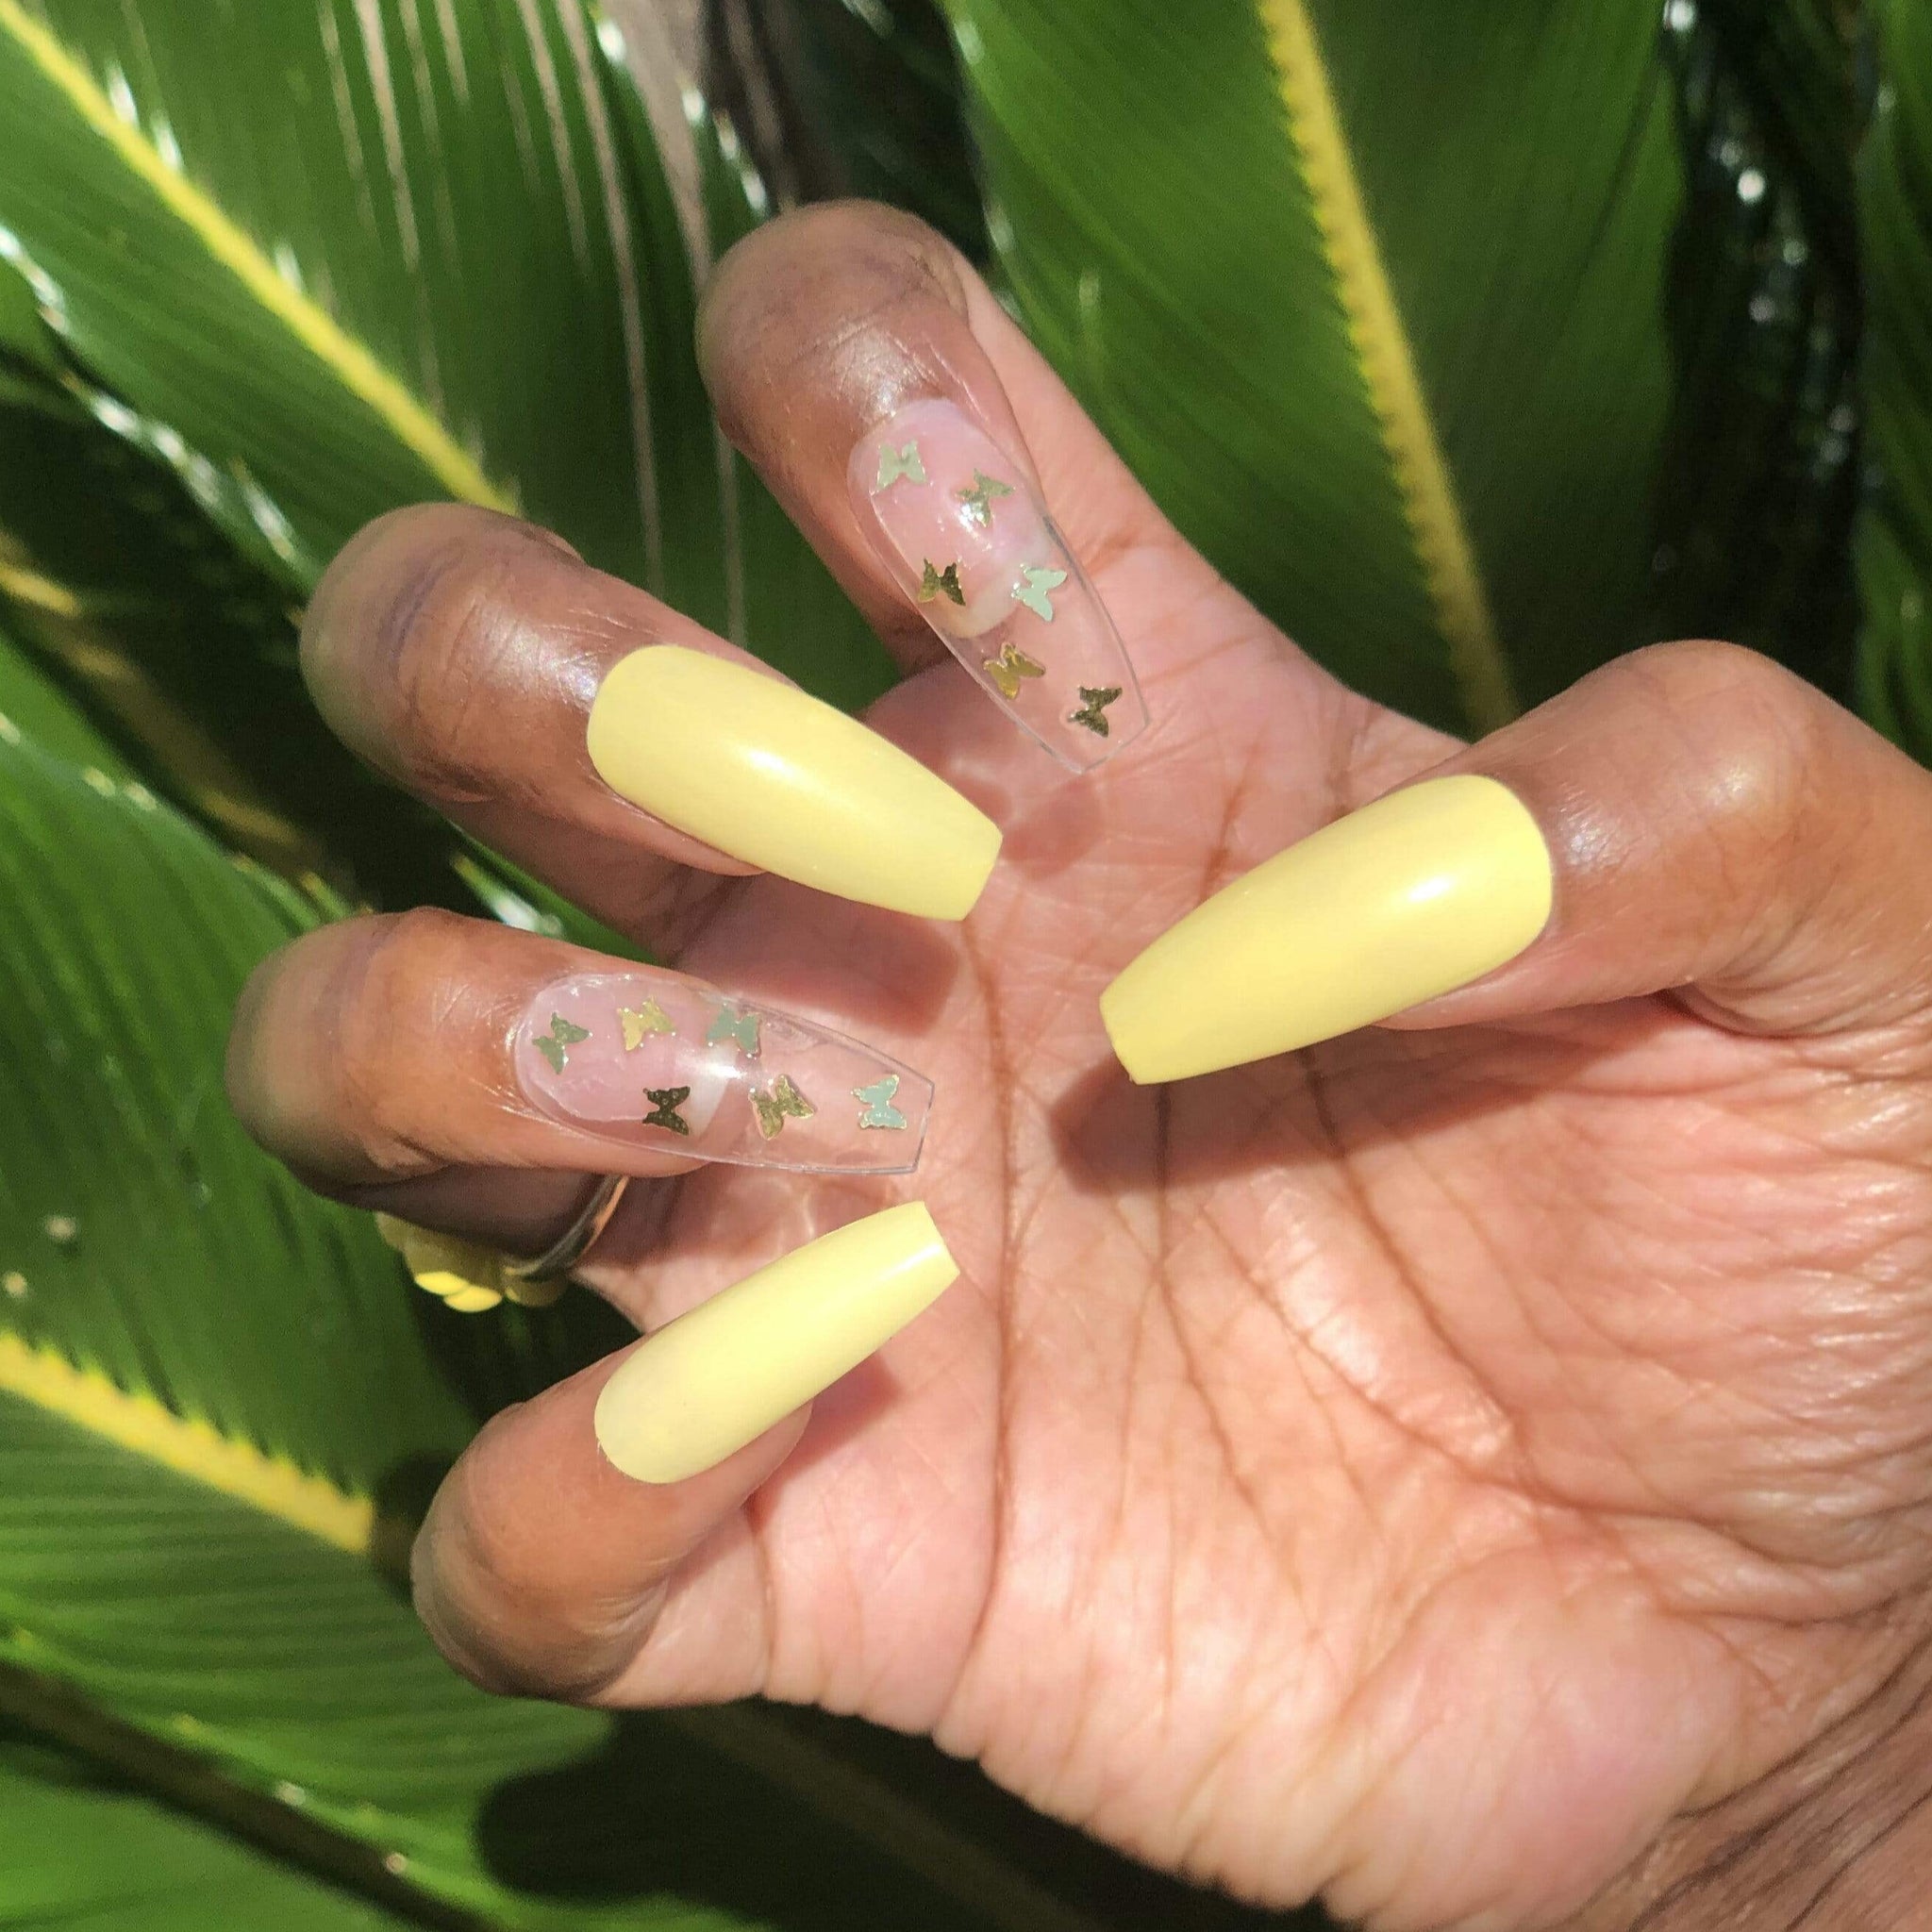 Manicure hand wearing light yellow nails. The index and ring finger nails are clear with yellow butterflies on them.